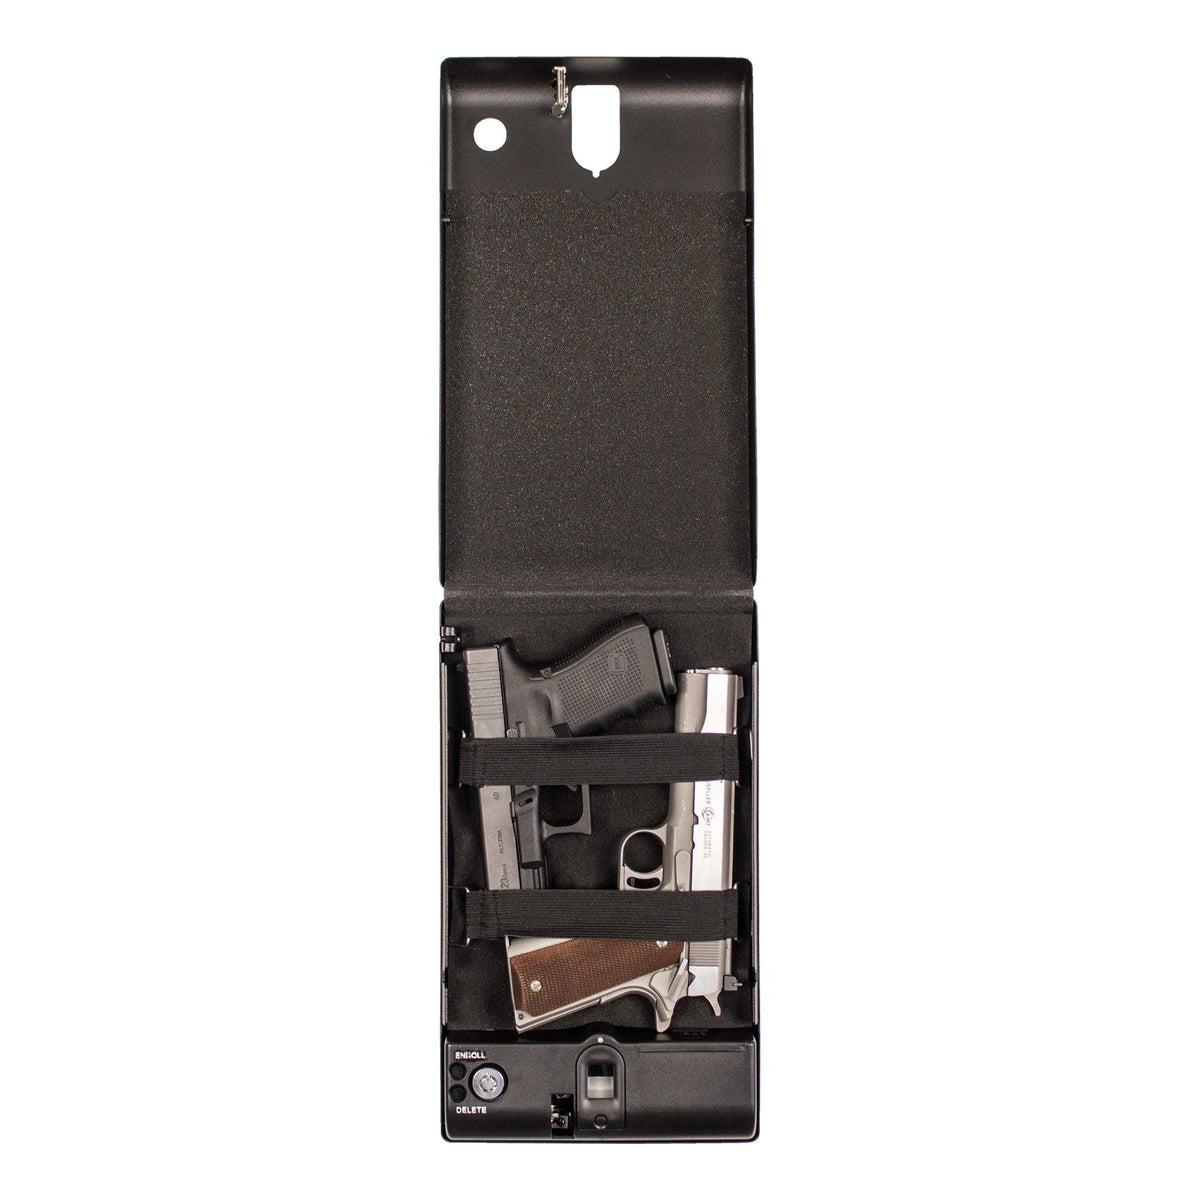 Tracker SPS-04B Small Pistol Safe With Biometric Lock Open with Handguns Strapped in